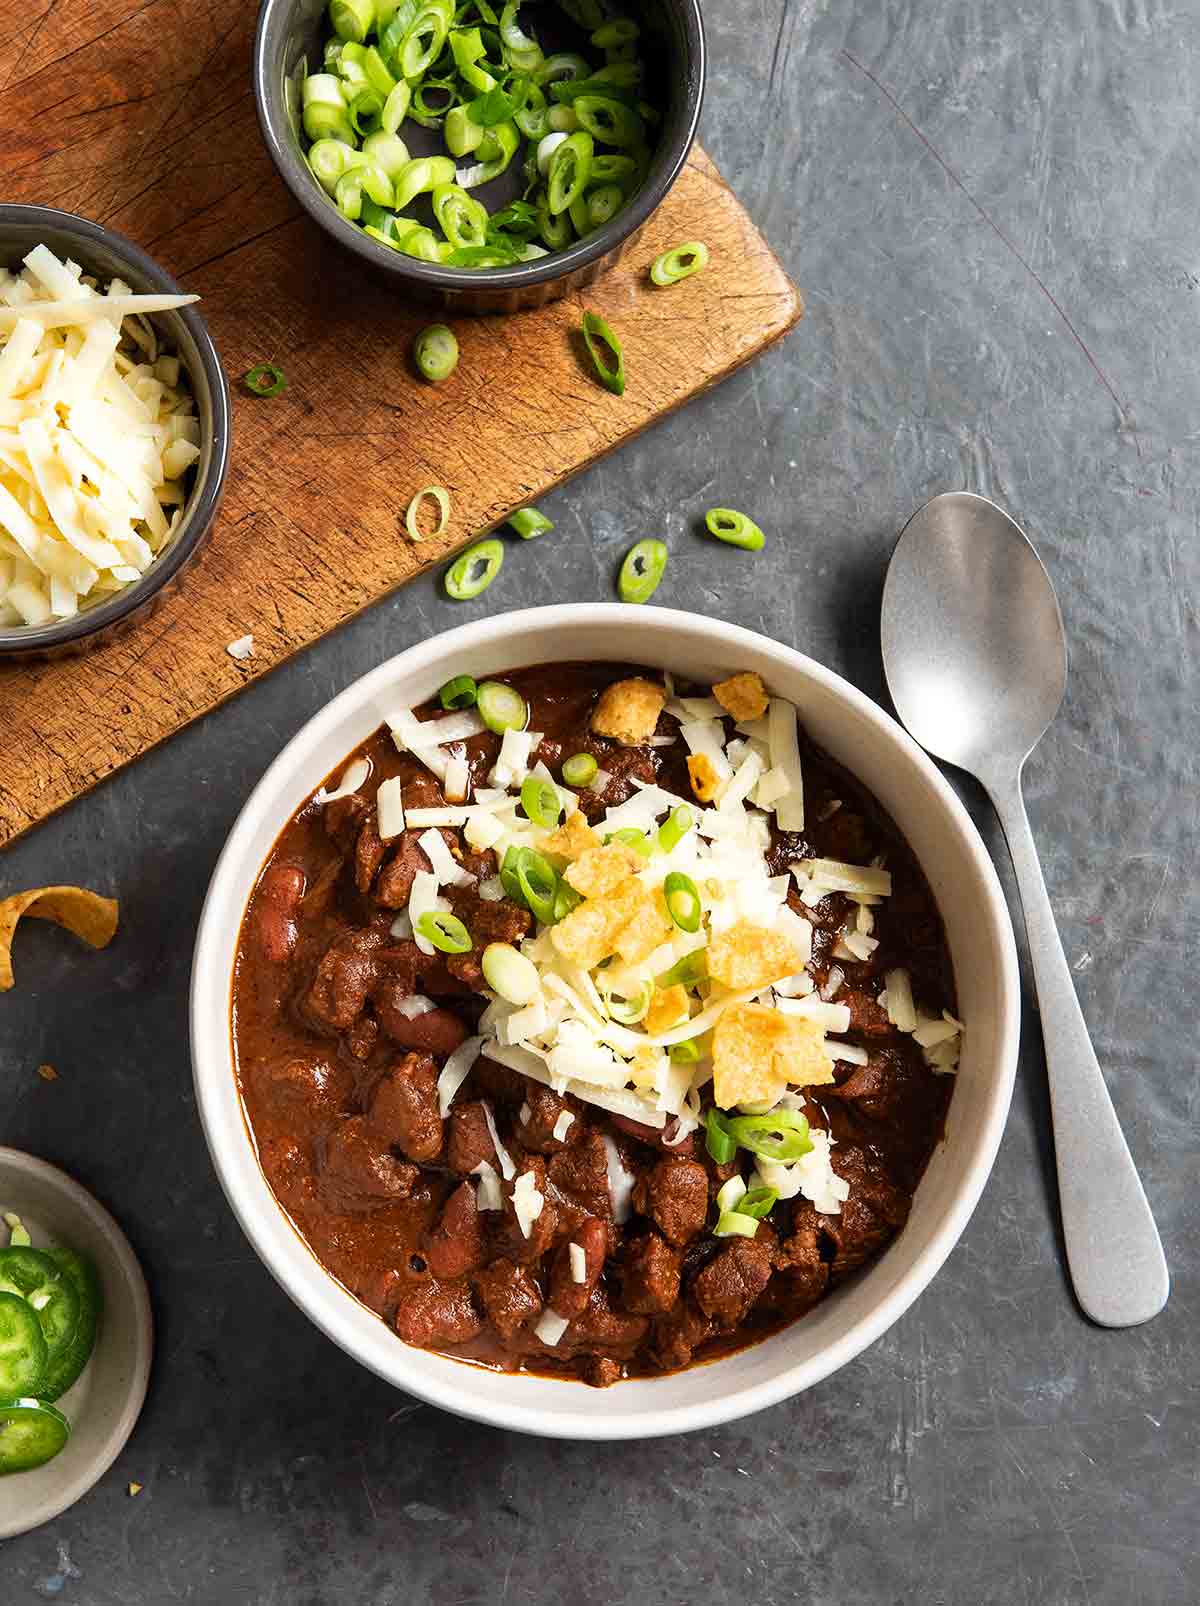 A bowl of chili con carne with beans, topped with cheese, scallions, and chips, with a spoon, a cutting board, and bowls of toppings on the side.